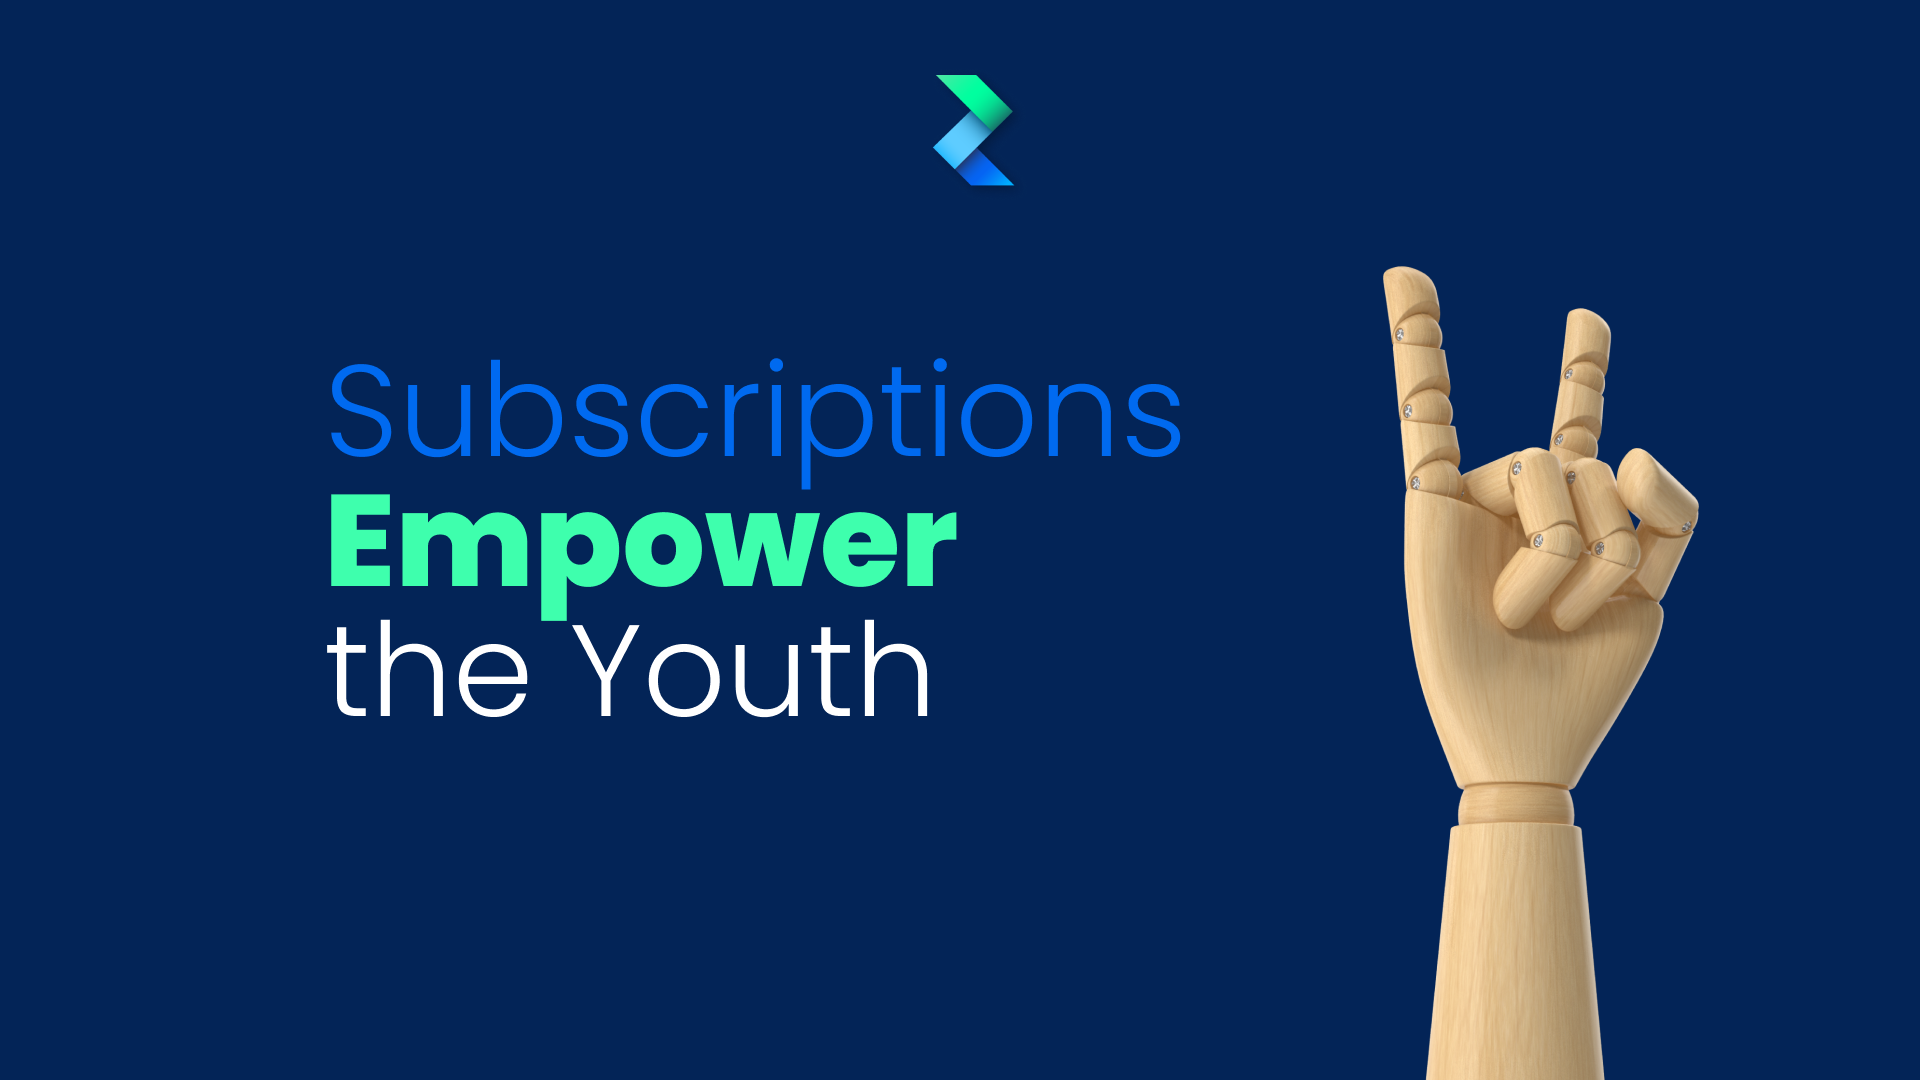 Subscriptions Empower the Youth